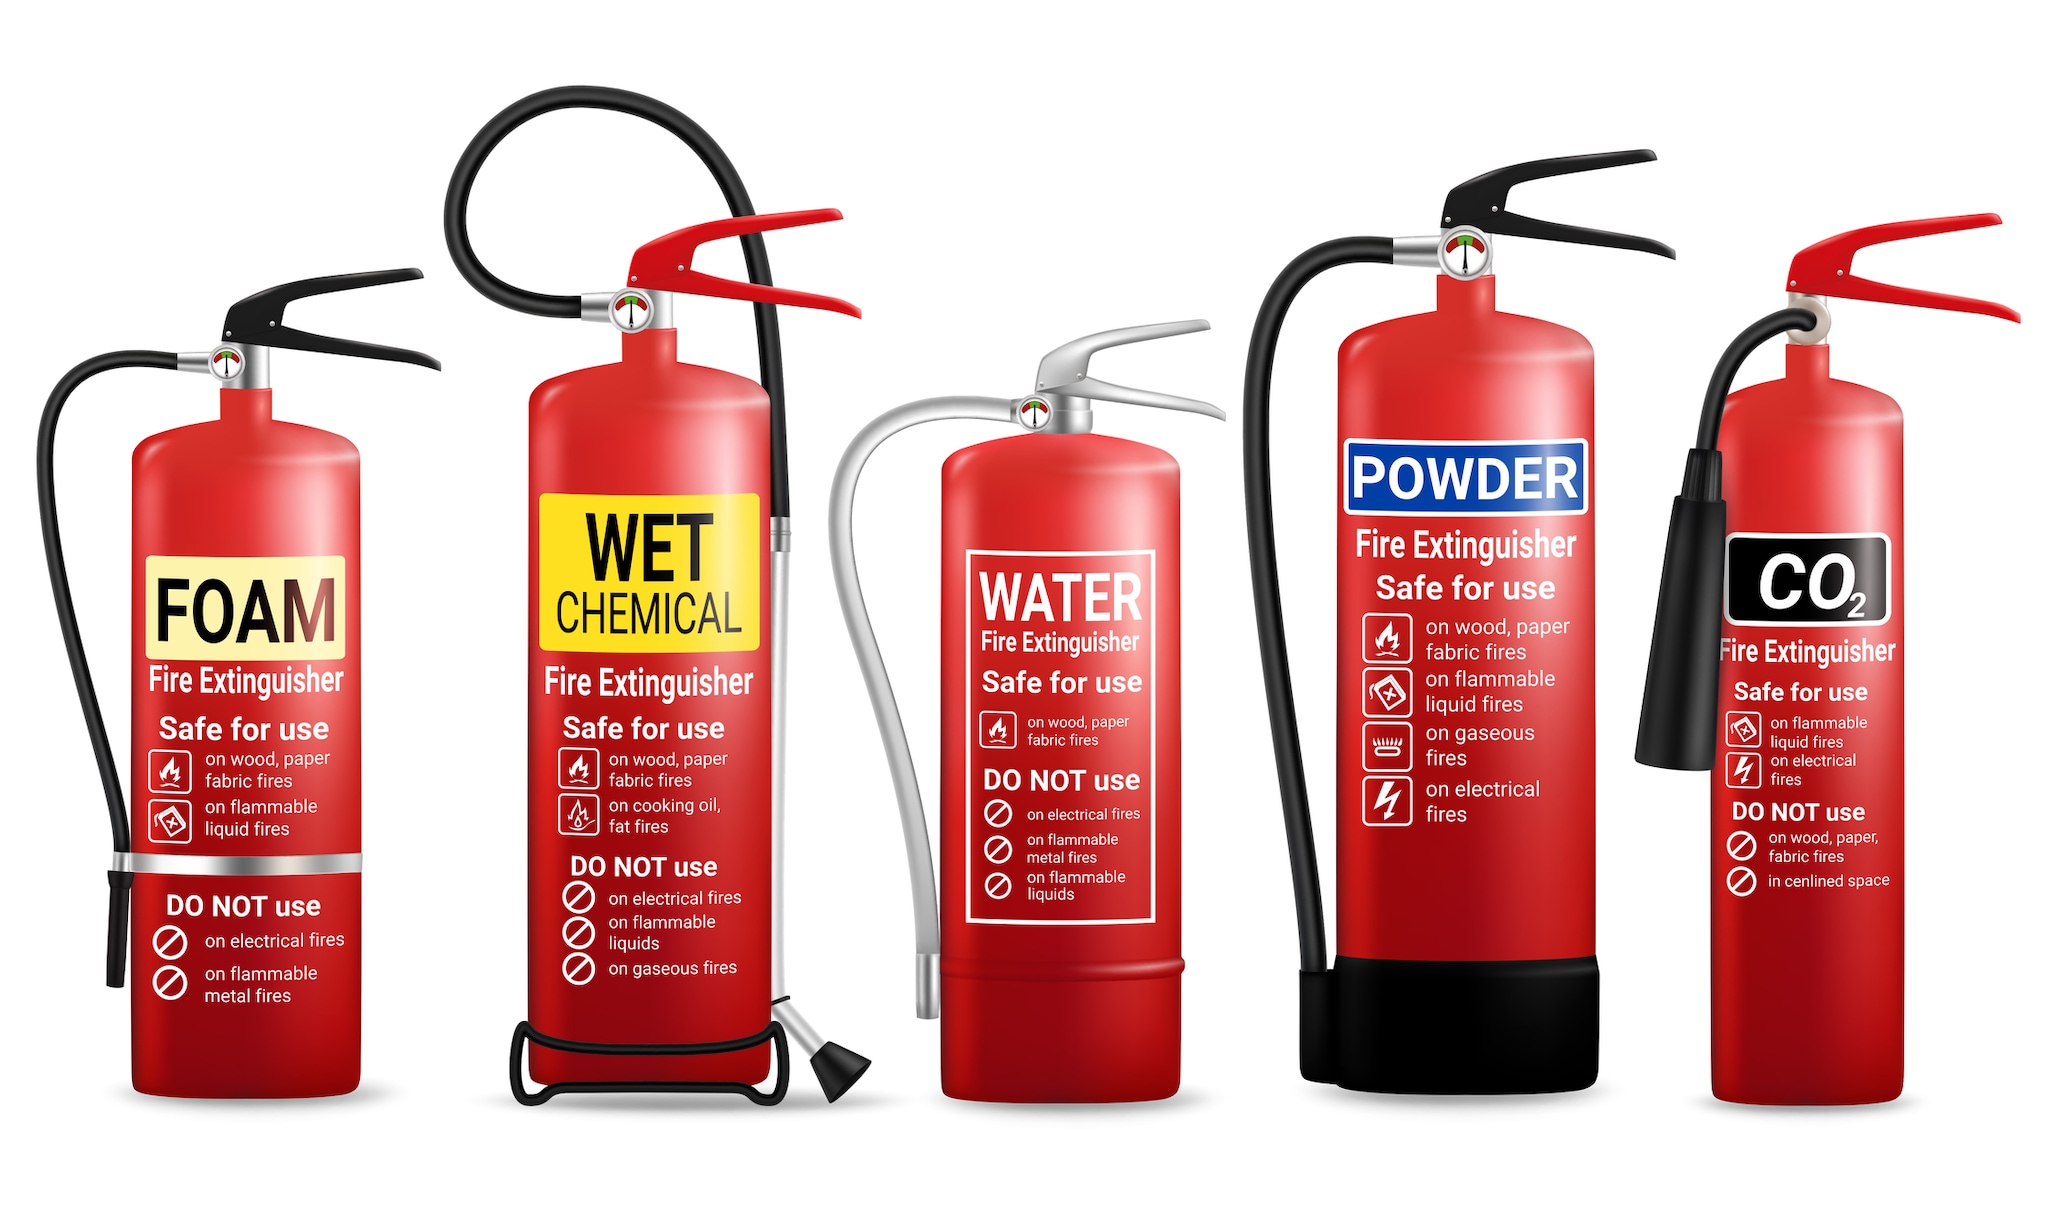 What is the proper way to use a fire extinguisher?